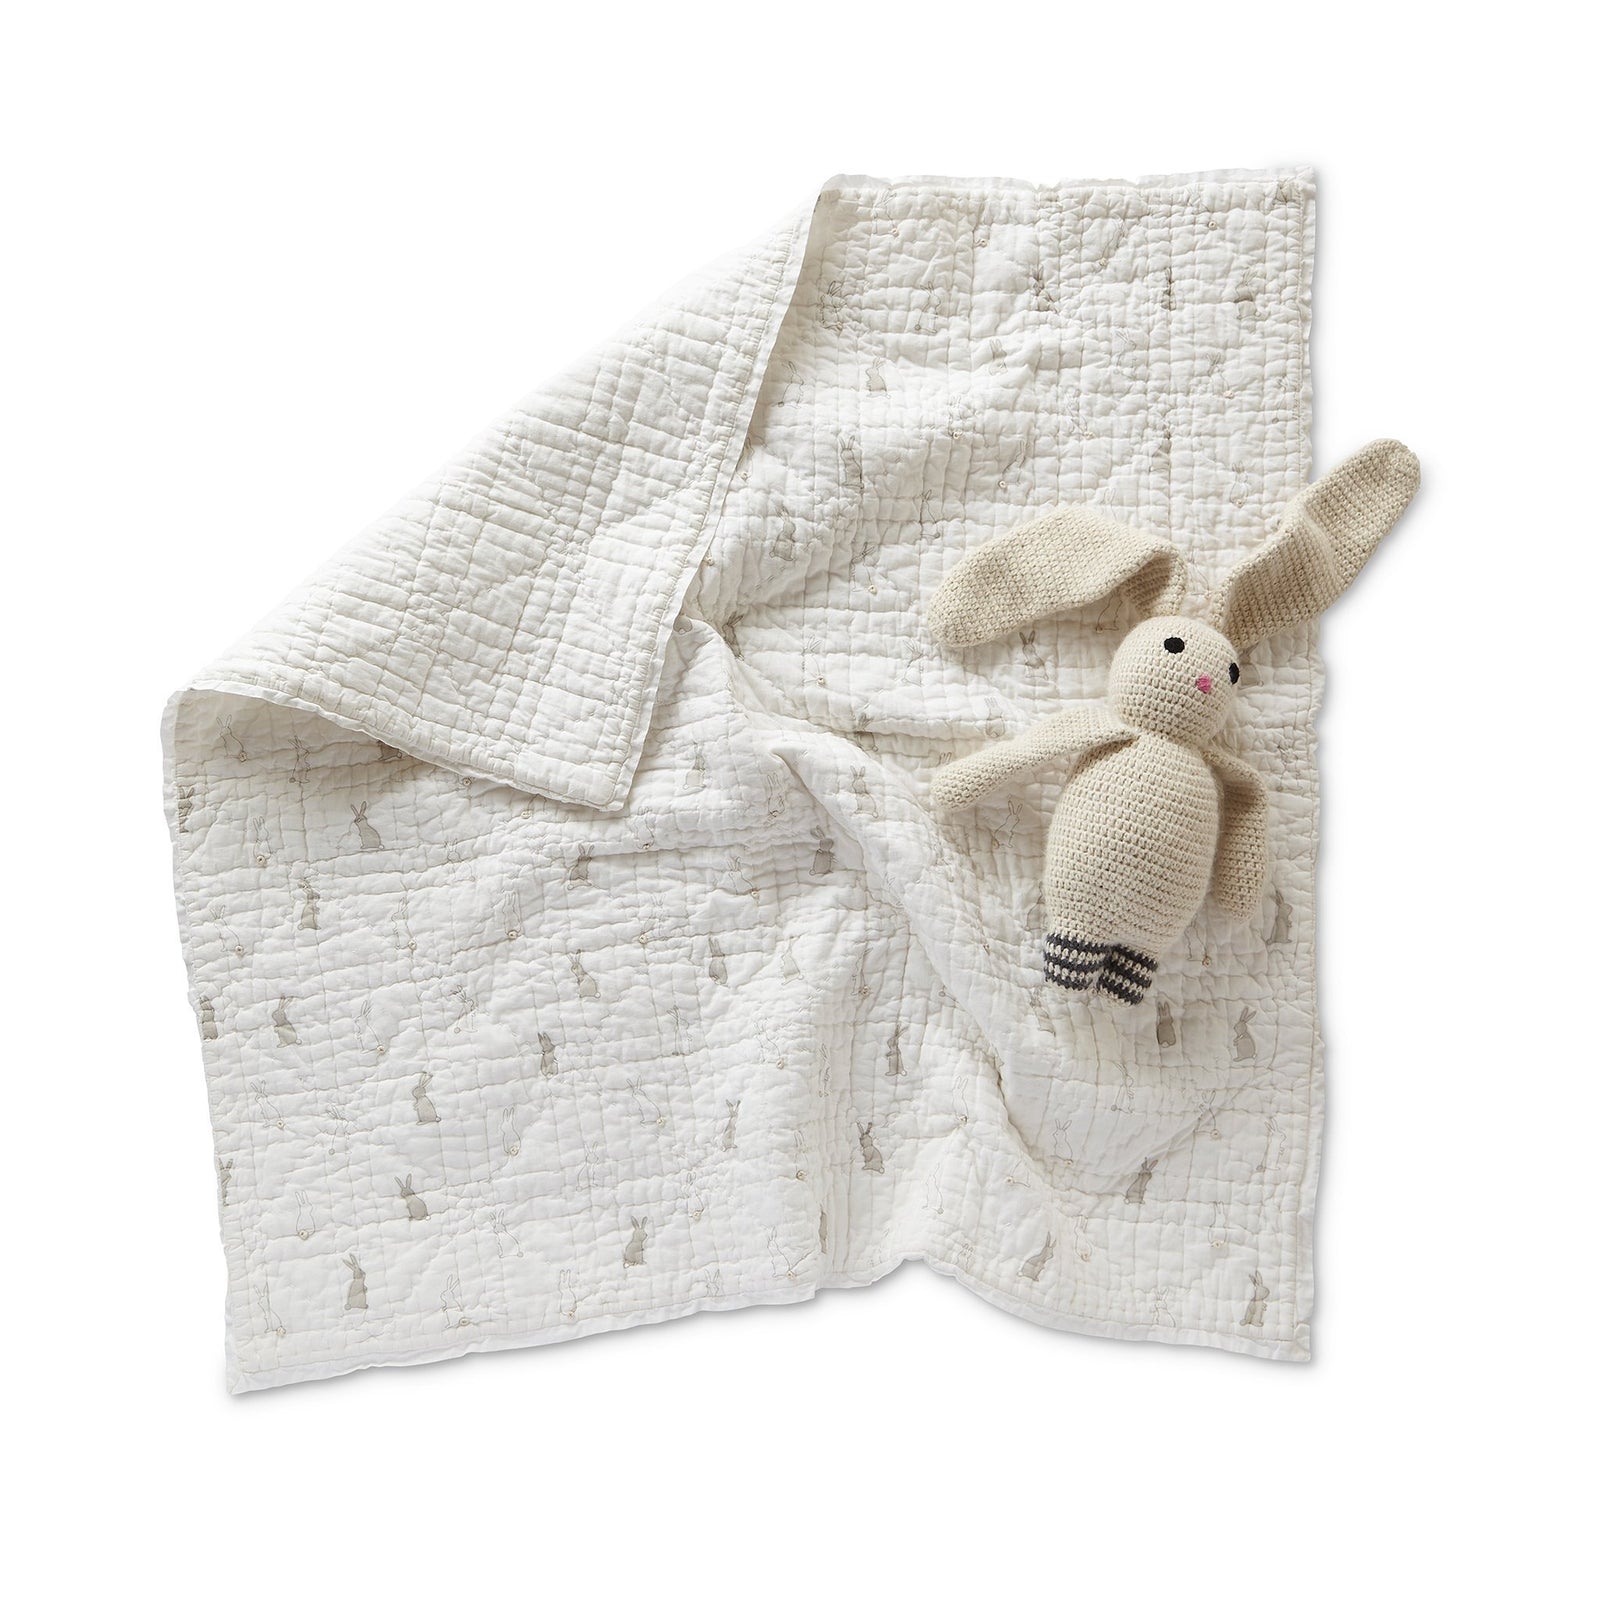 Pehr Bunny Hop Blanket with toy bunny on top. 100% cotton cambric exterior. White with bunny print.